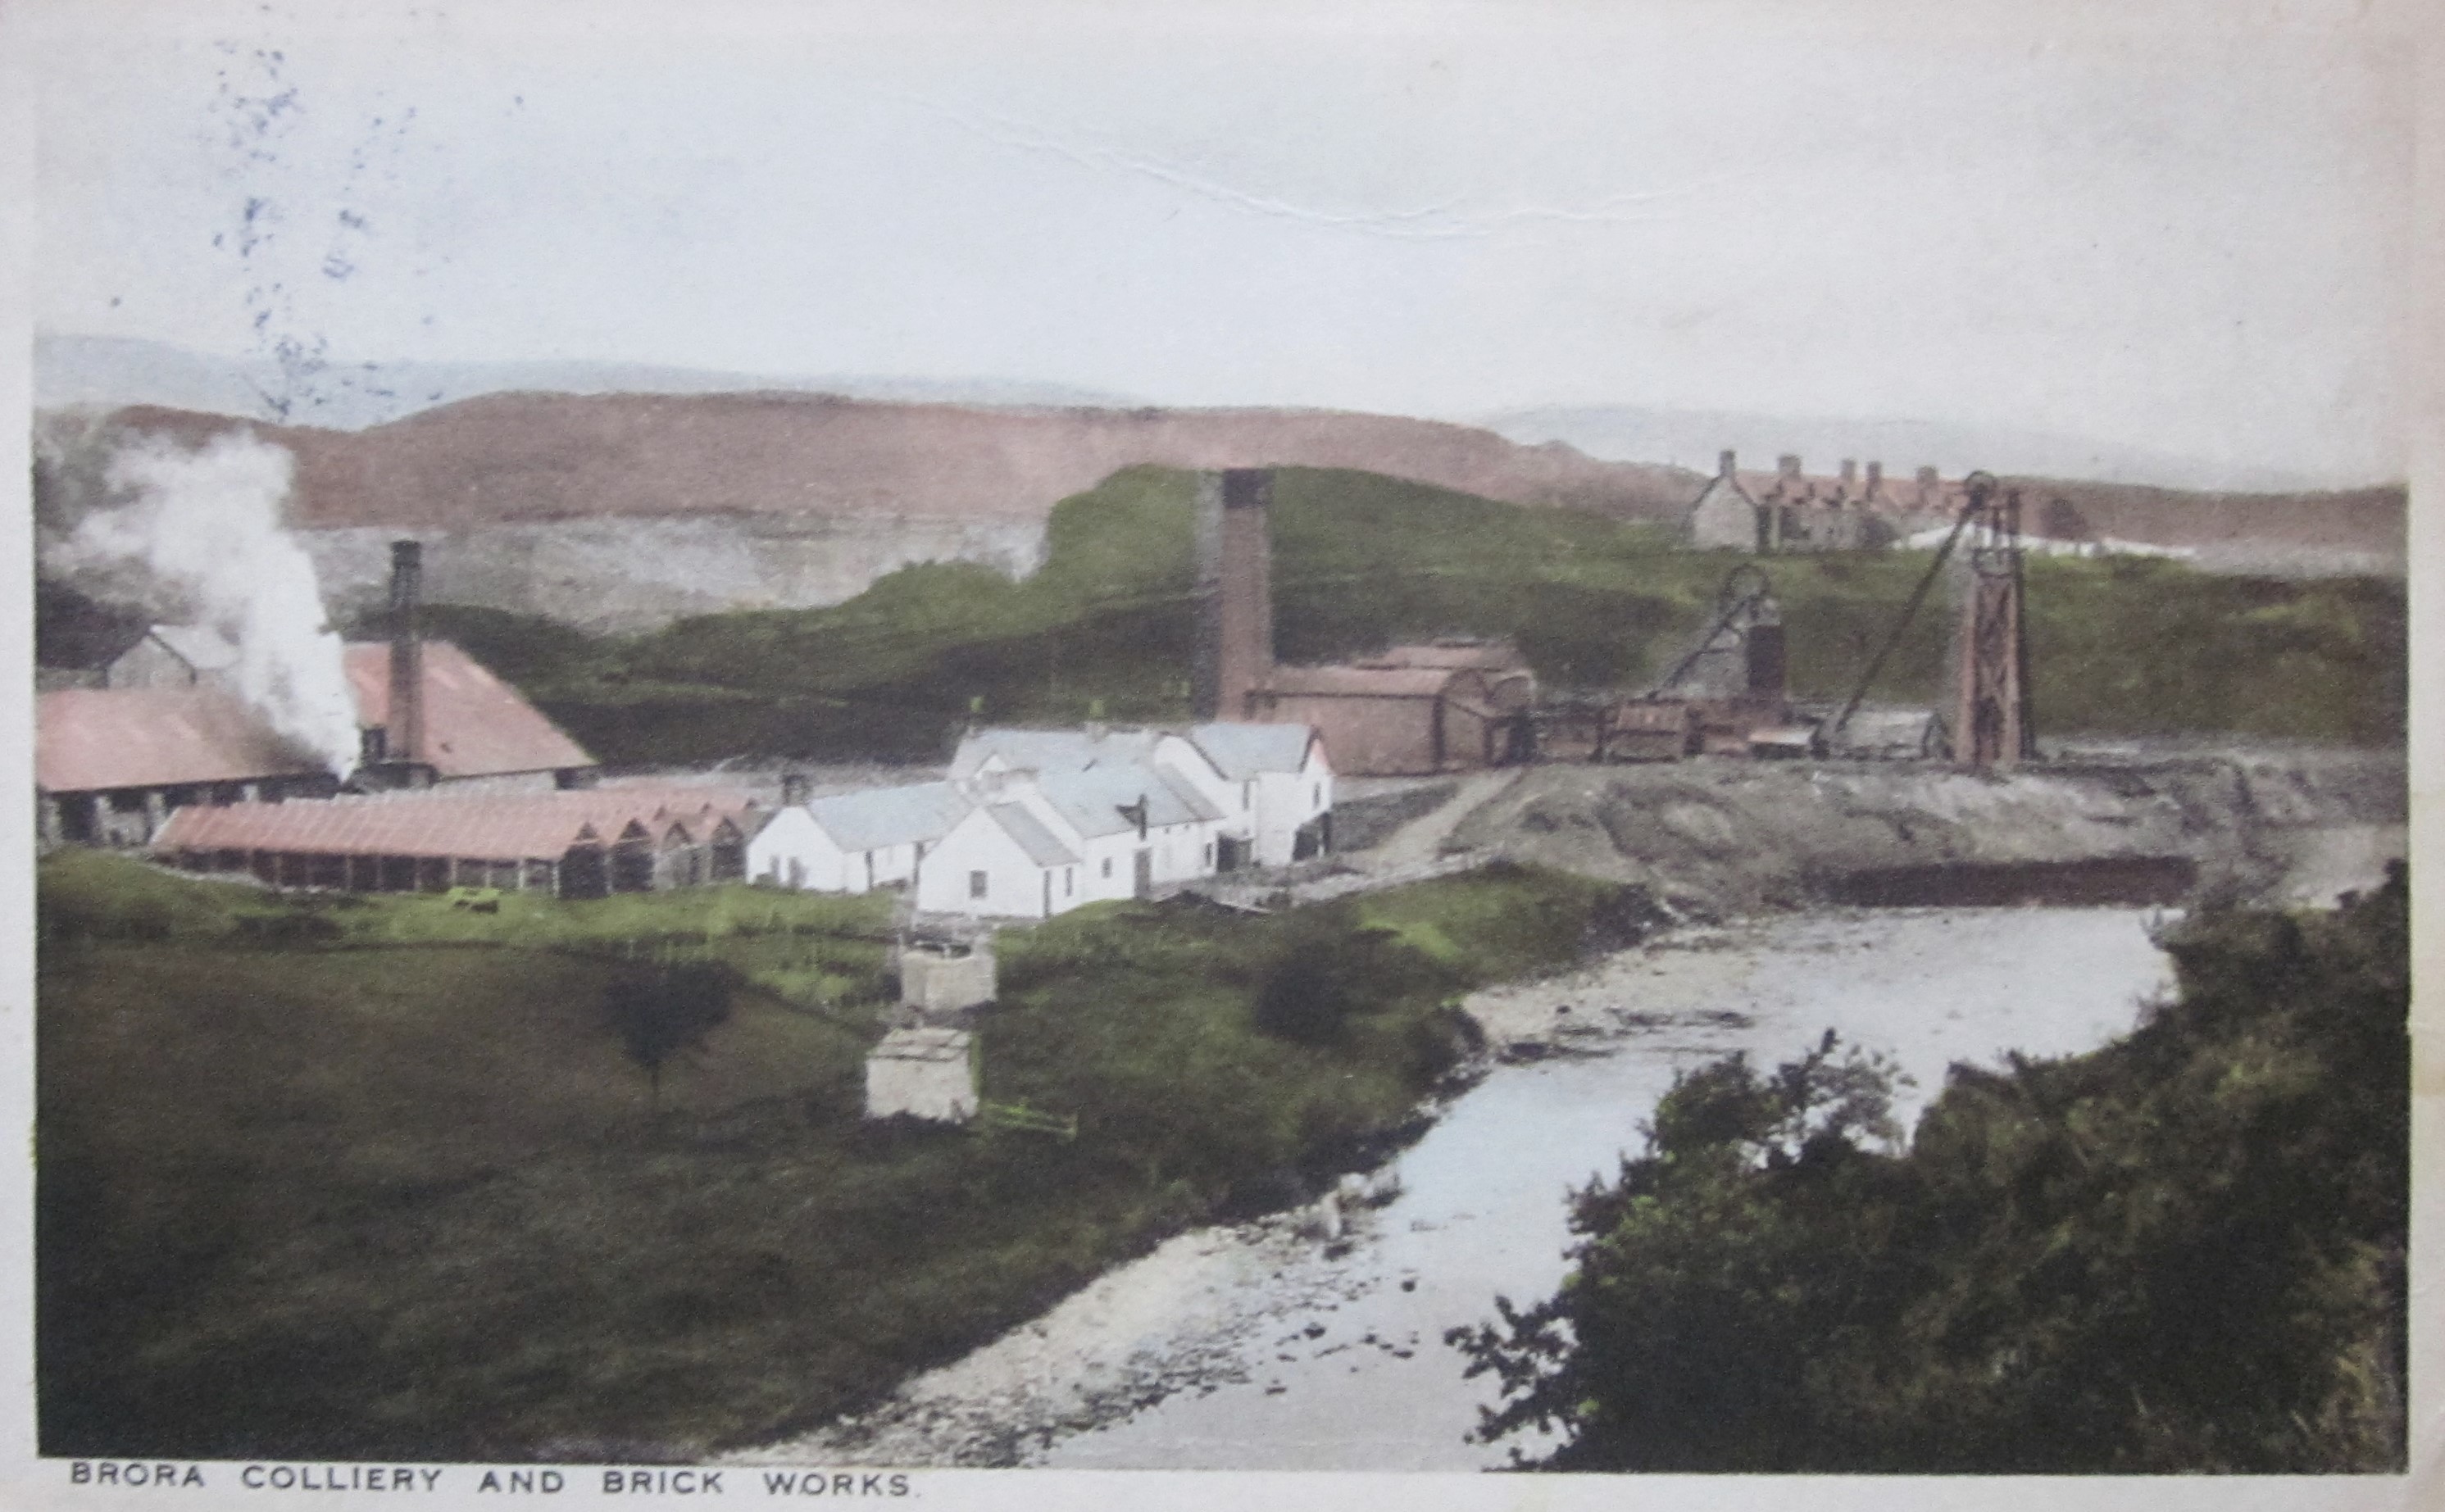 Brora Colliery and Brick Works